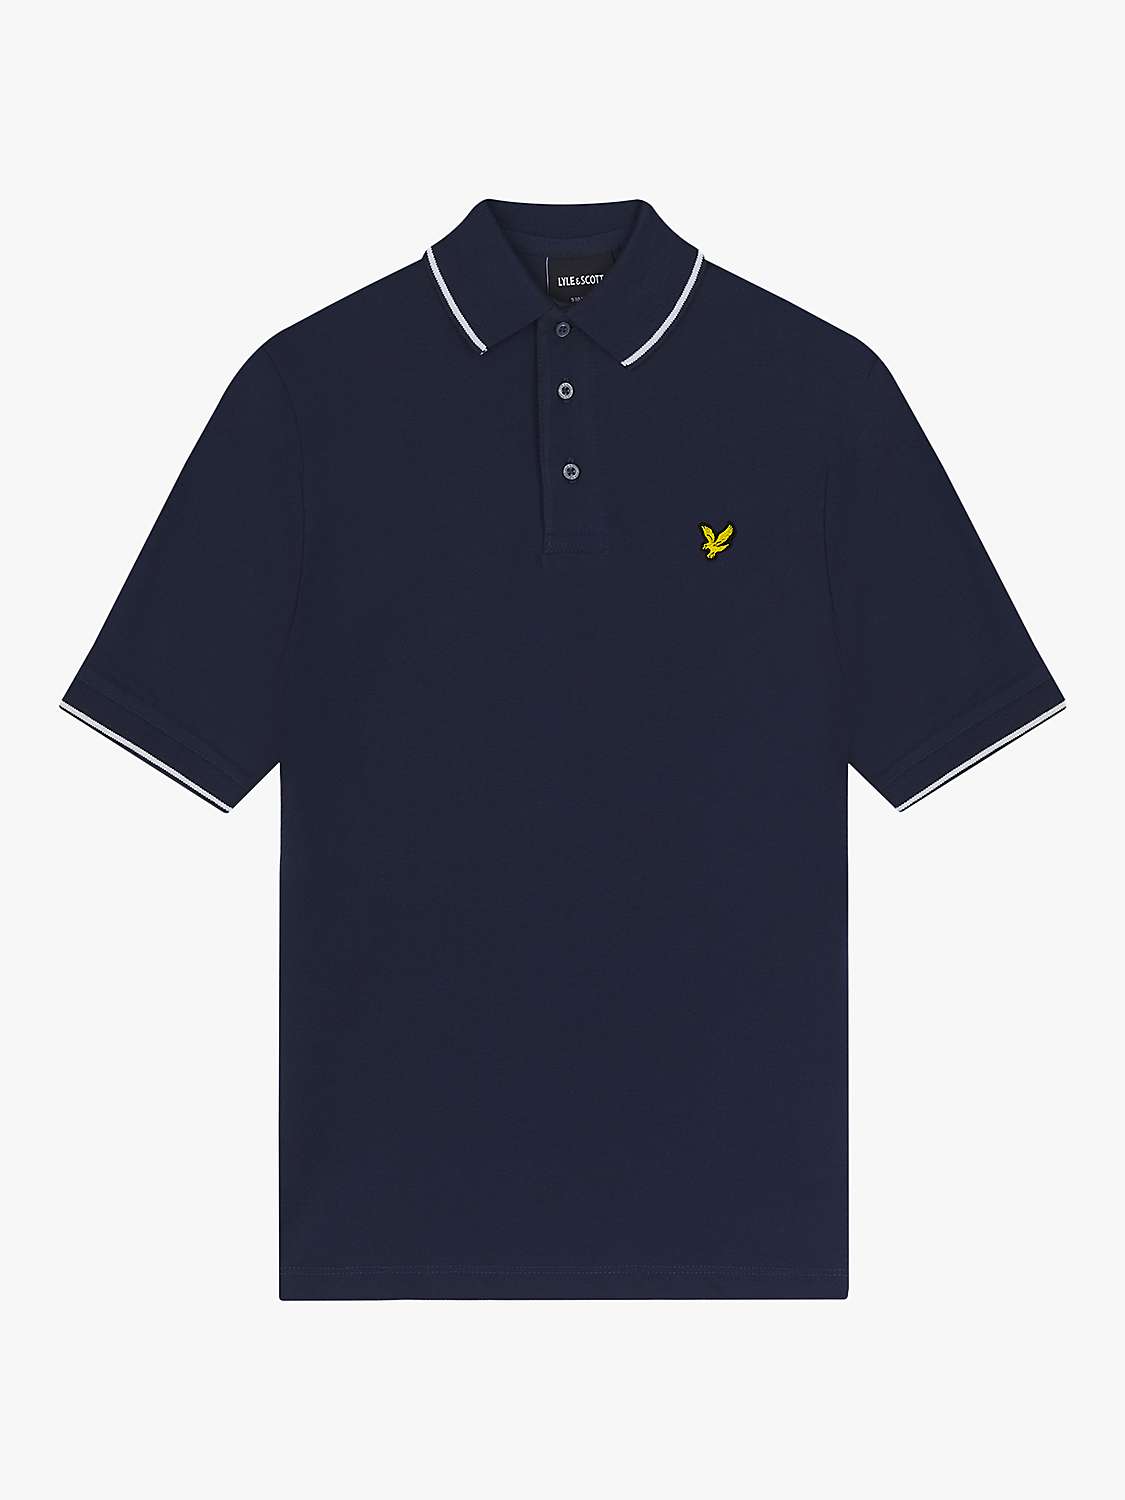 Buy Lyle & Scott Kids' Tipped Polo Shirt, Navy/White Online at johnlewis.com